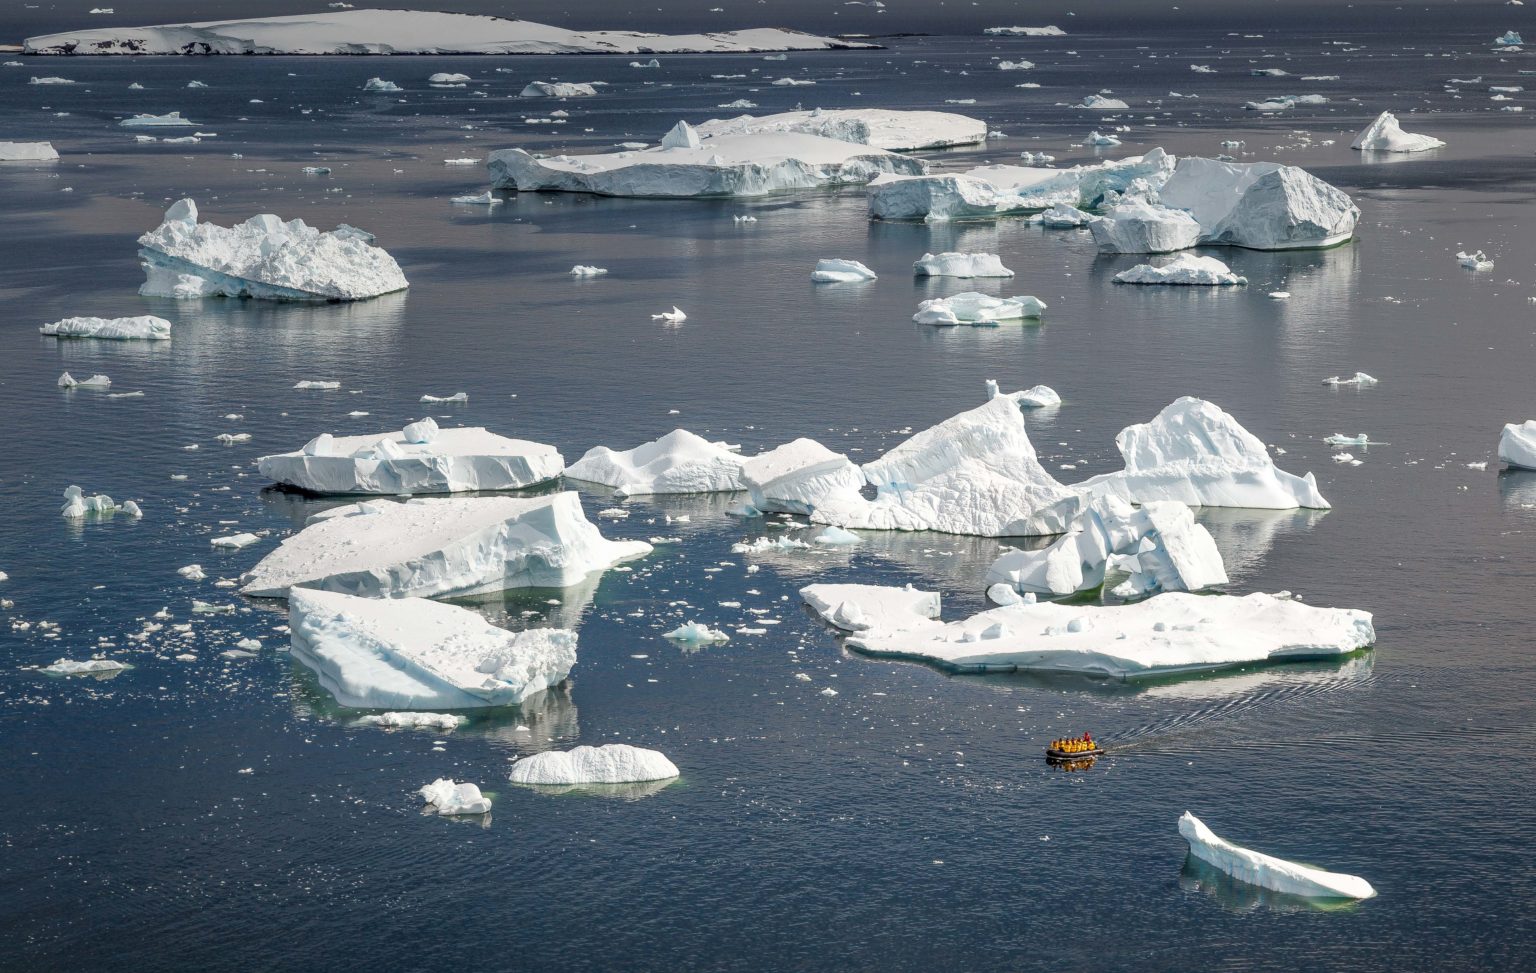 zodiac boat dwarfed by the size of the icebergs floating in the Antarctic waters